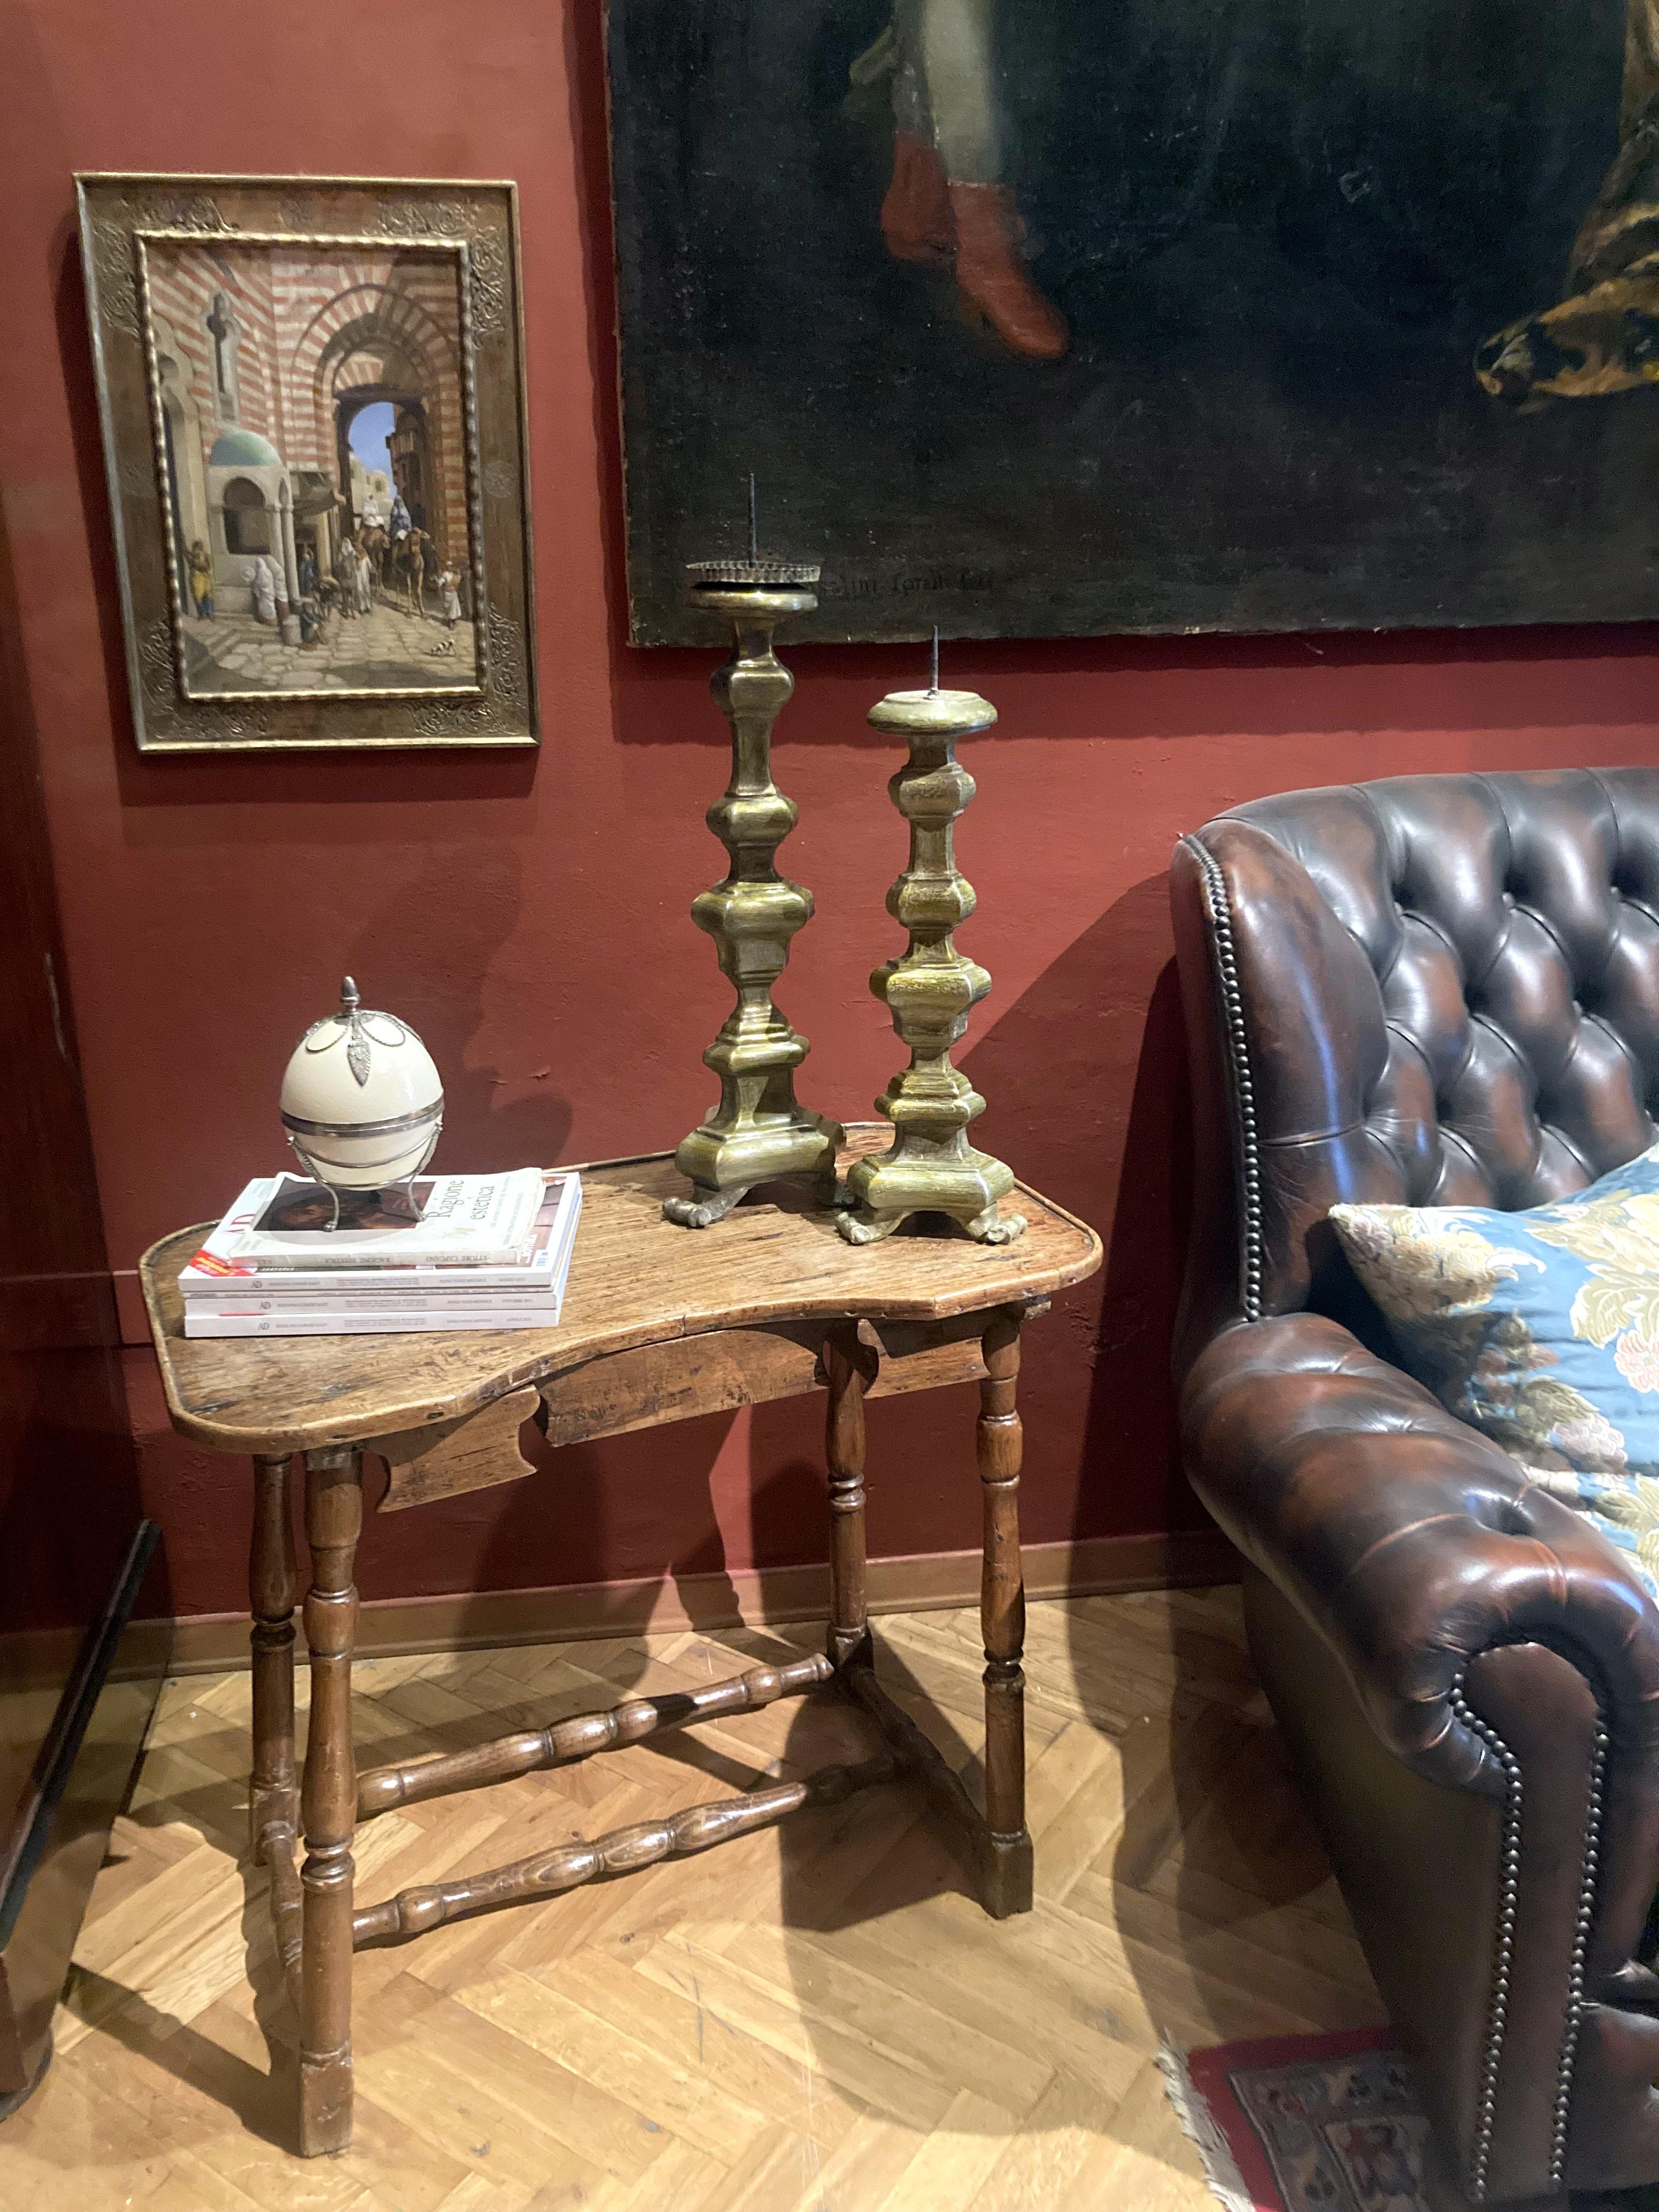 This antique Italian baroque period rustic table dating back to early 18th century all hand cut and carved boasts a lovely shape, great proportions and convenient size. This organic table's aesthetic expresses simplicity, humbleness, and being in